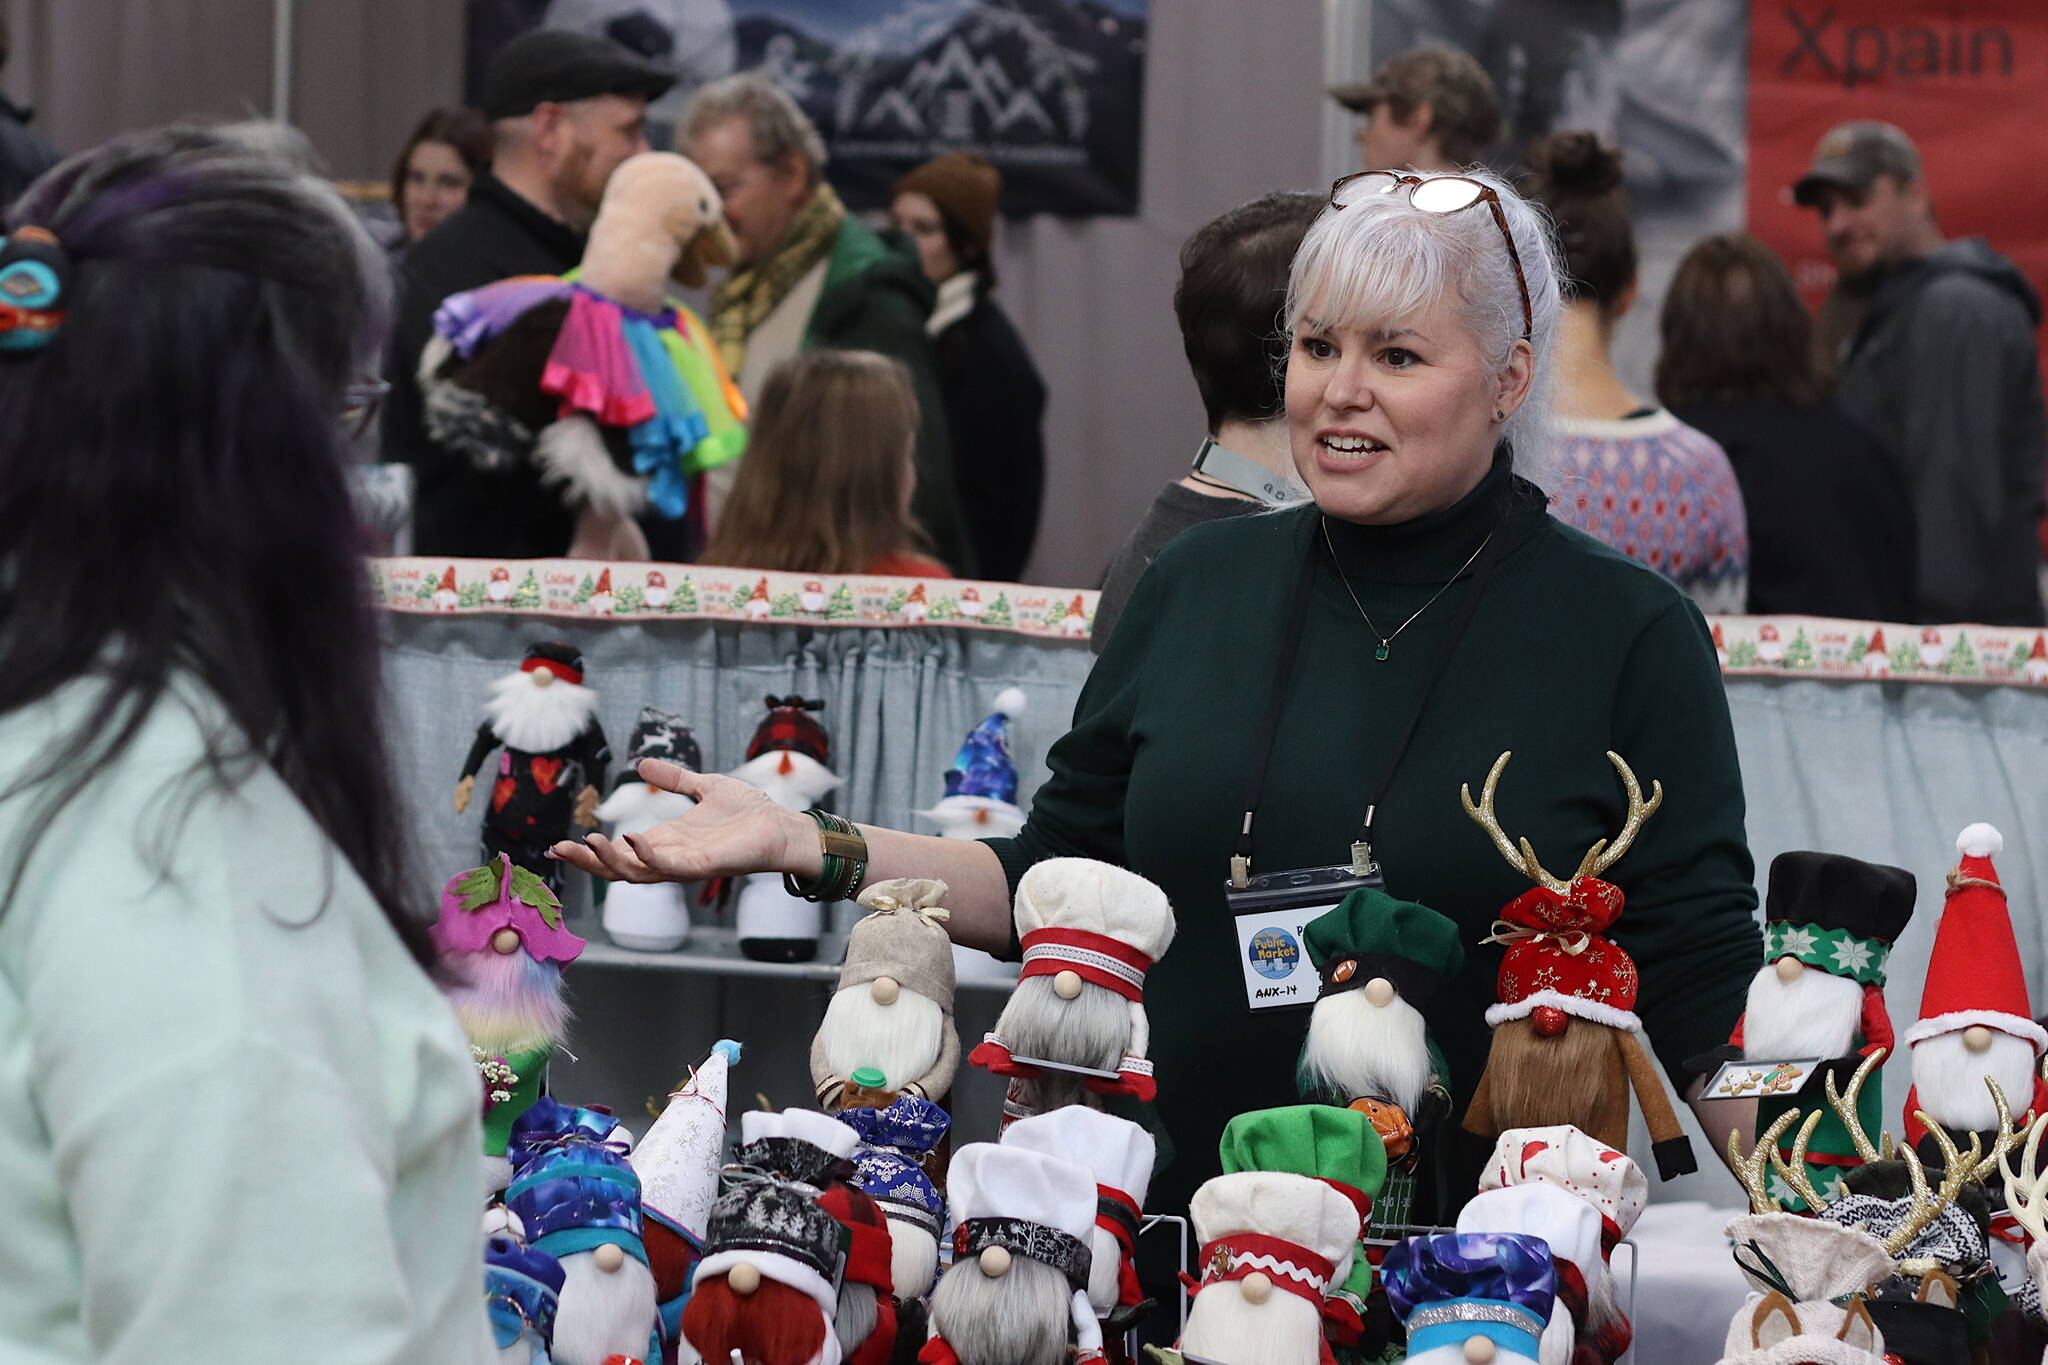 Tracy Eshelman, a former Juneau resident who attended her first Juneau Public Markets during their early years in the 1980s, describes her handmade holiday-theme gnomes to a shopper Saturday in the Juneau Arts Humanities Council building. She is a first-time vendor at the market, after creating the gnomes to lift people’s spirits during the COVID-19 pandemic. (Mark Sabbatini / Juneau Empire)